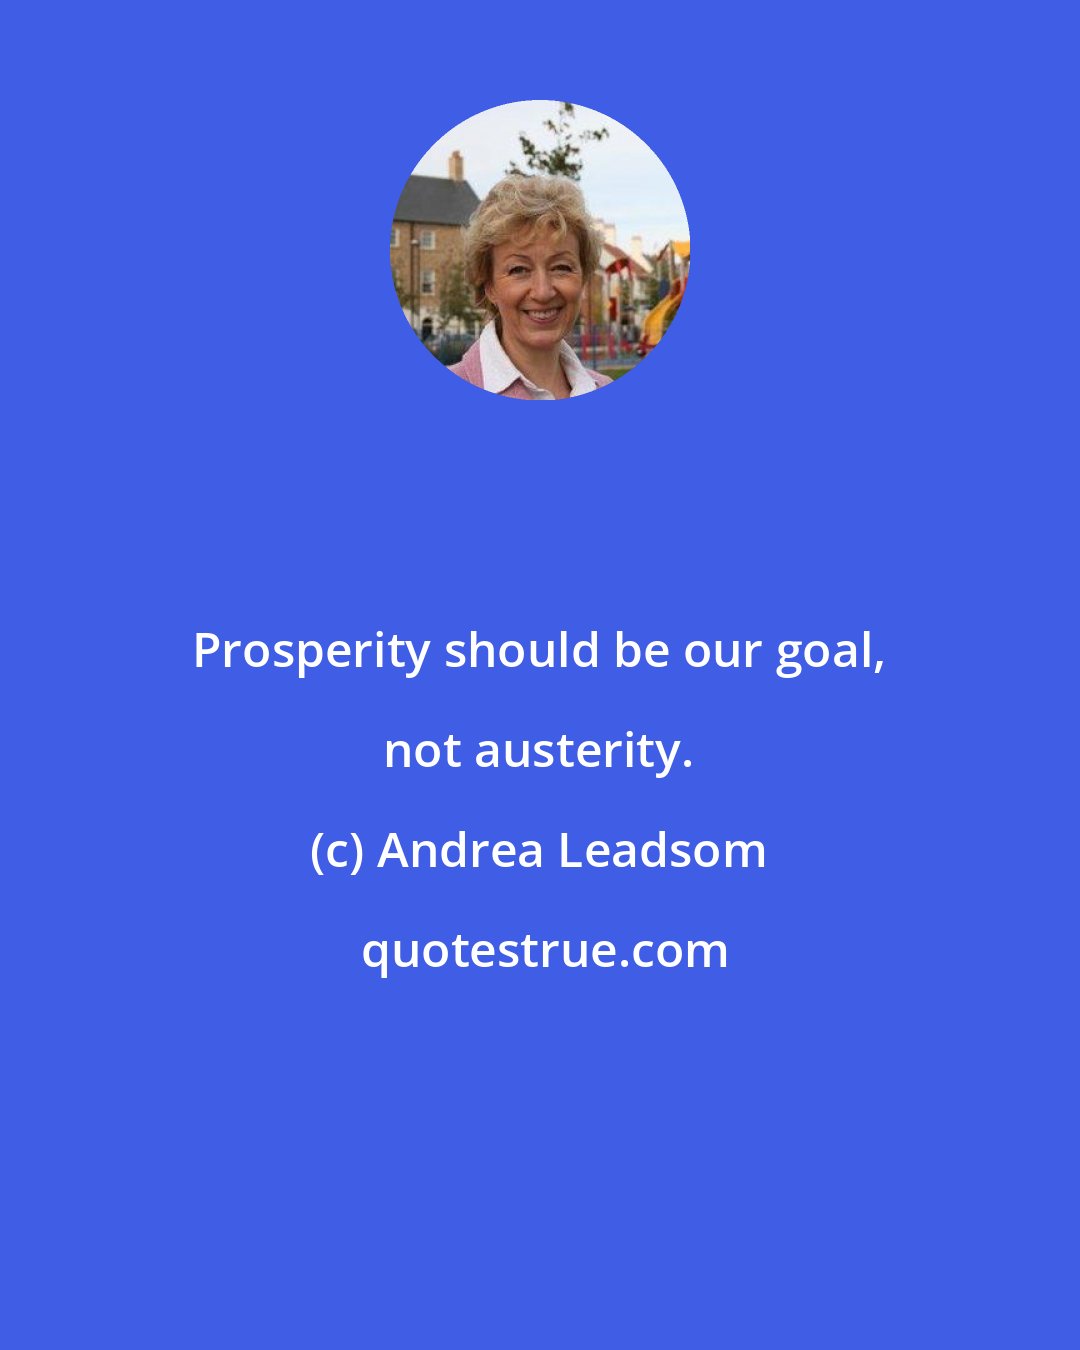 Andrea Leadsom: Prosperity should be our goal, not austerity.